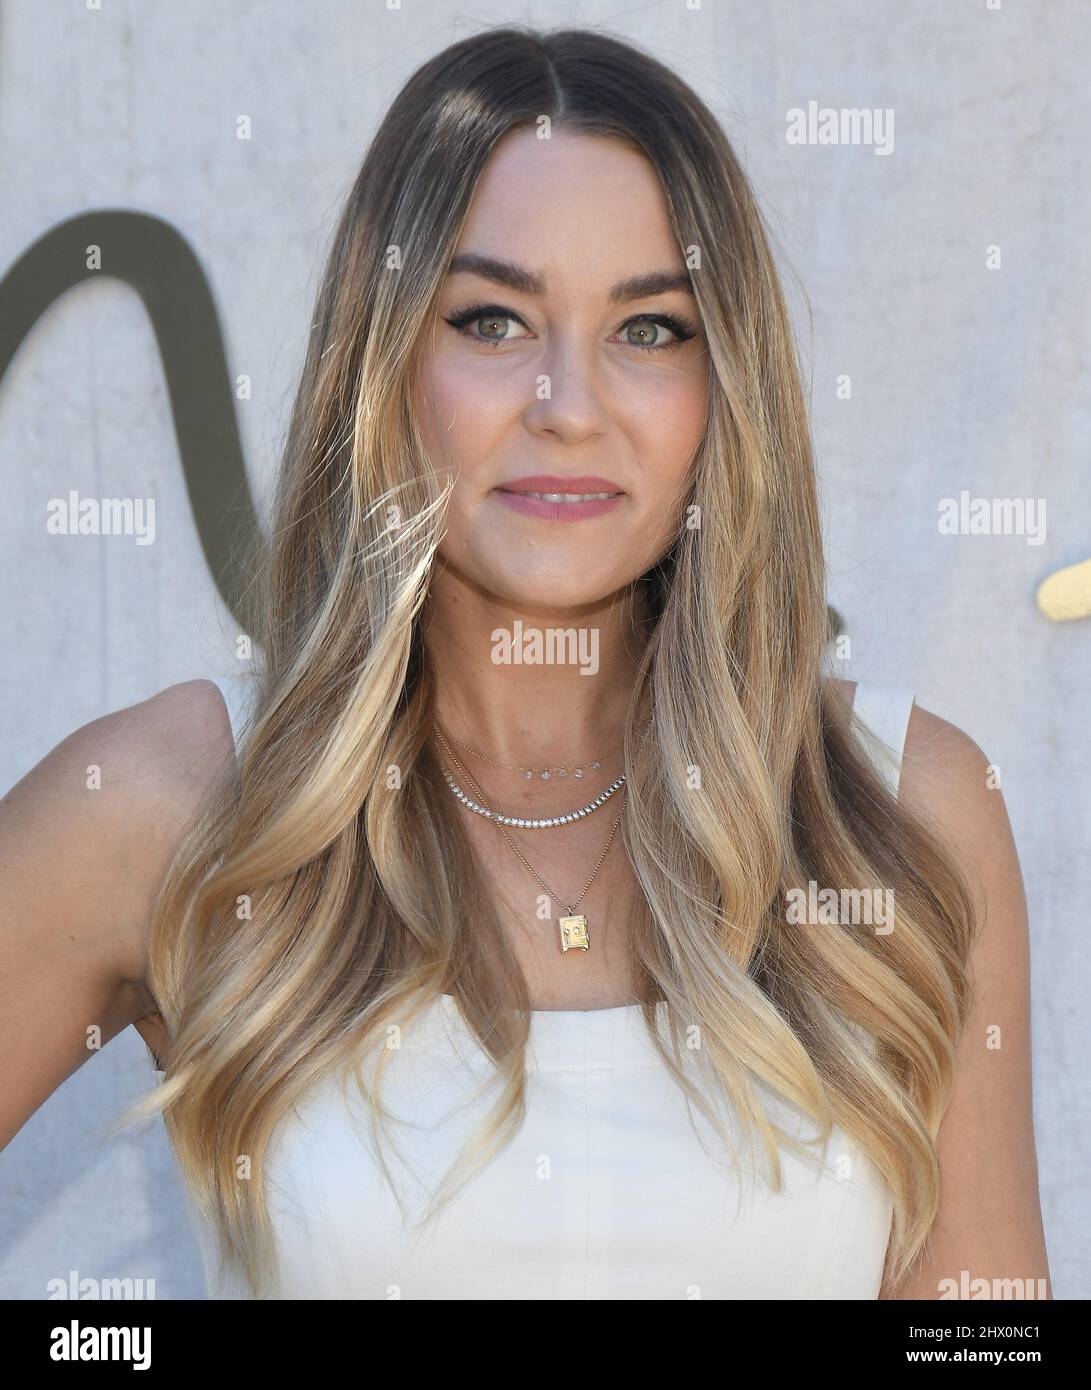 Lauren conrad the hills hi-res stock photography and images - Alamy